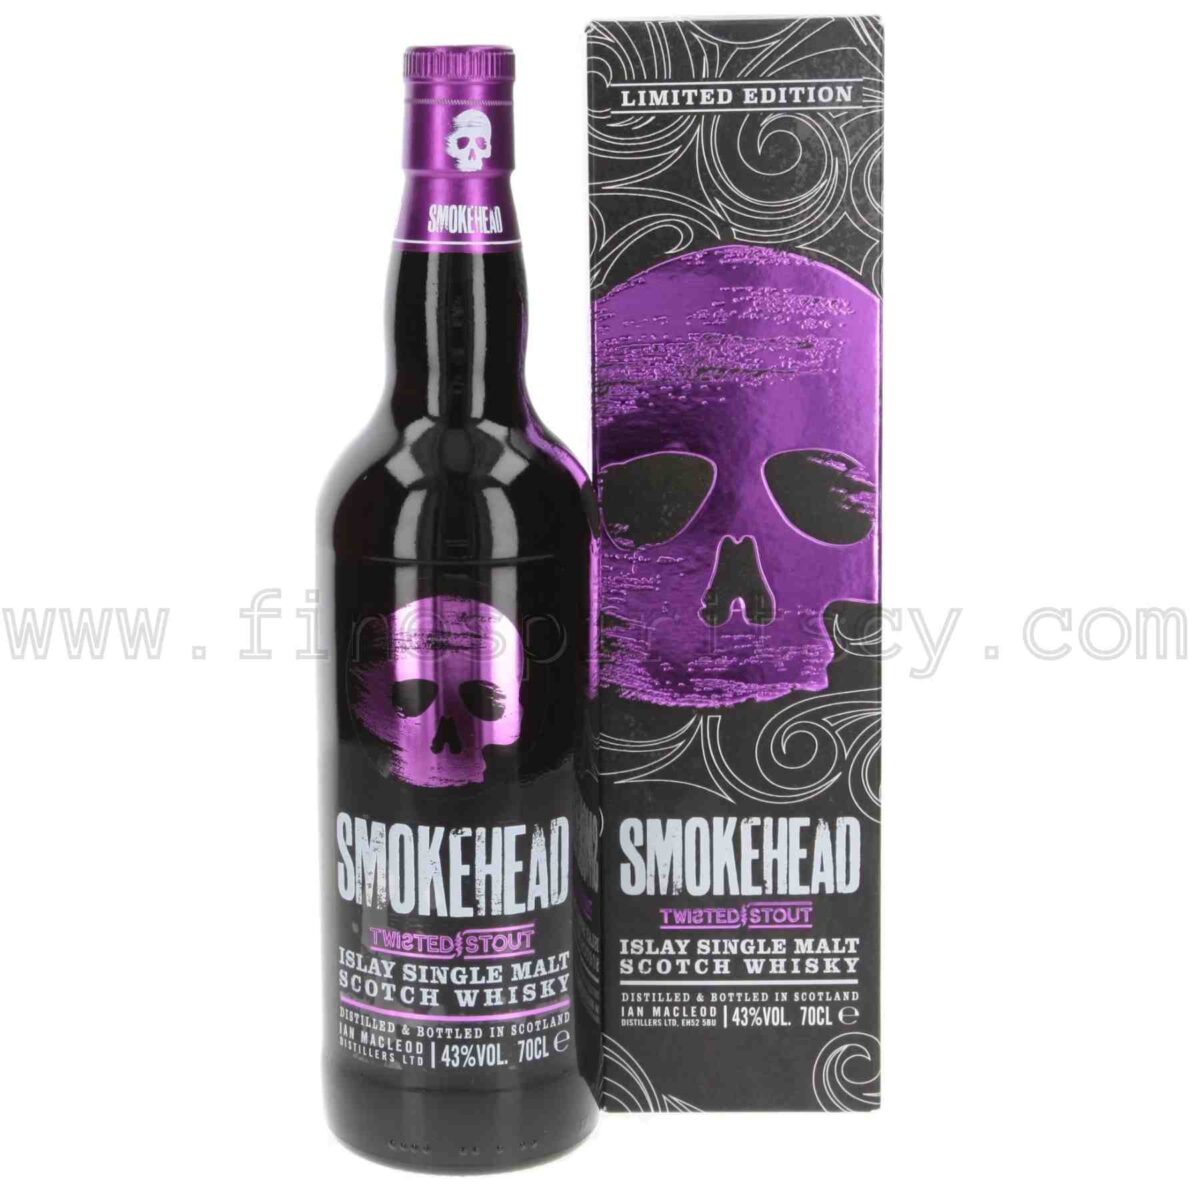 Smokehead Twisted Stout Limited Edition 700ml 70cl 0.7L